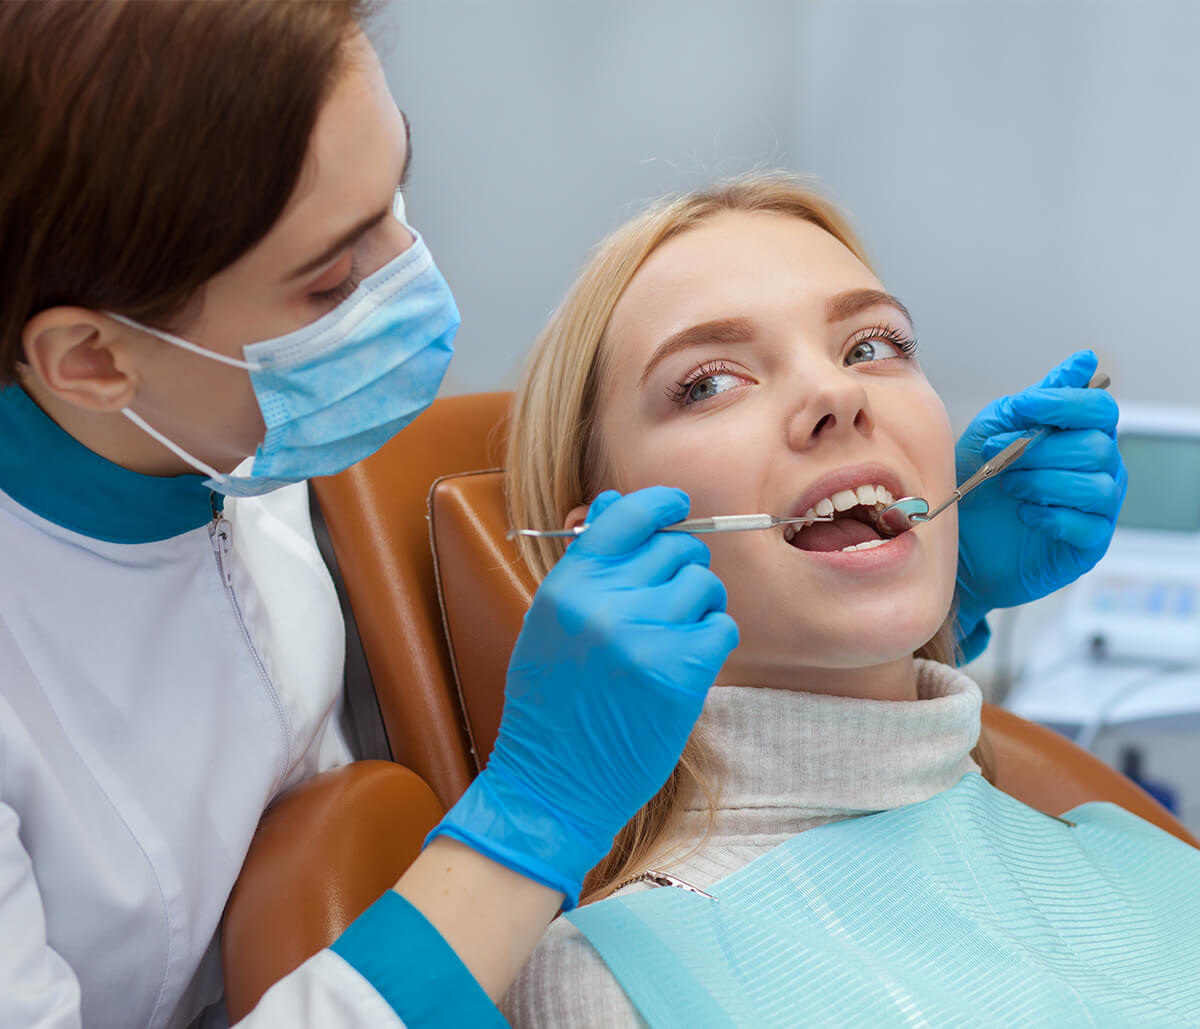 Dentist for Emergency Care in Houston Area